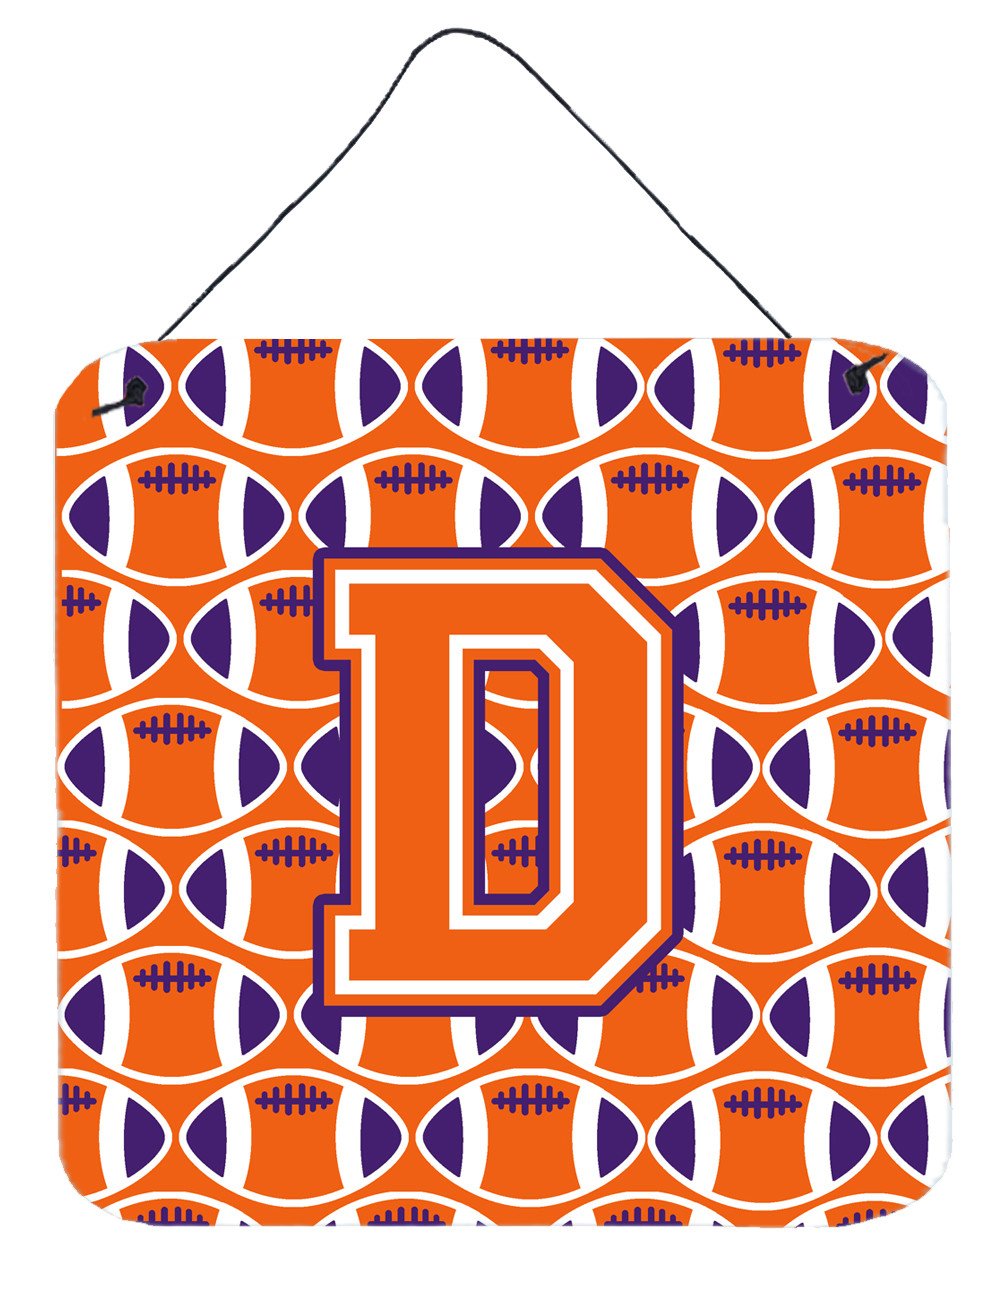 Letter D Football Orange, White and Regalia Wall or Door Hanging Prints CJ1072-DDS66 by Caroline's Treasures